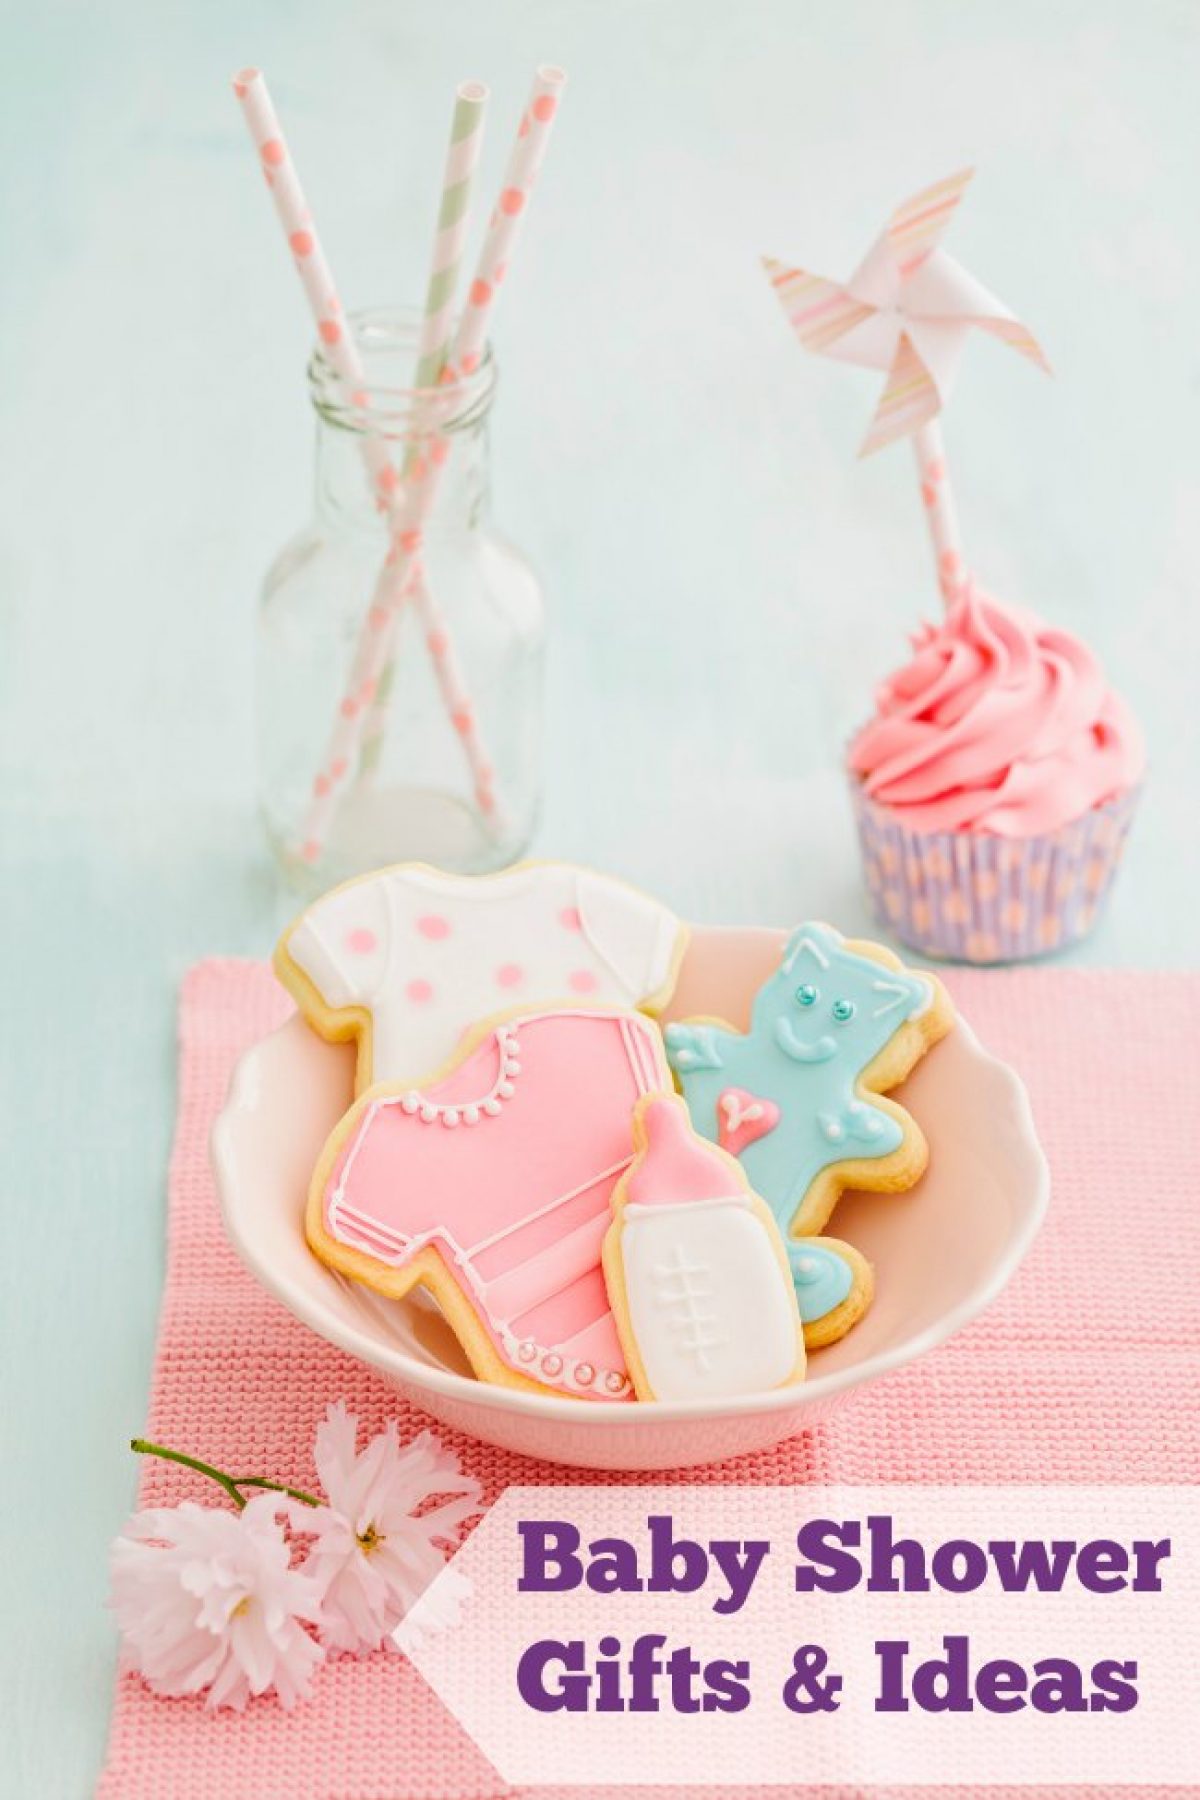 Baby Shower Ideas - Games, Decorations and Gifts